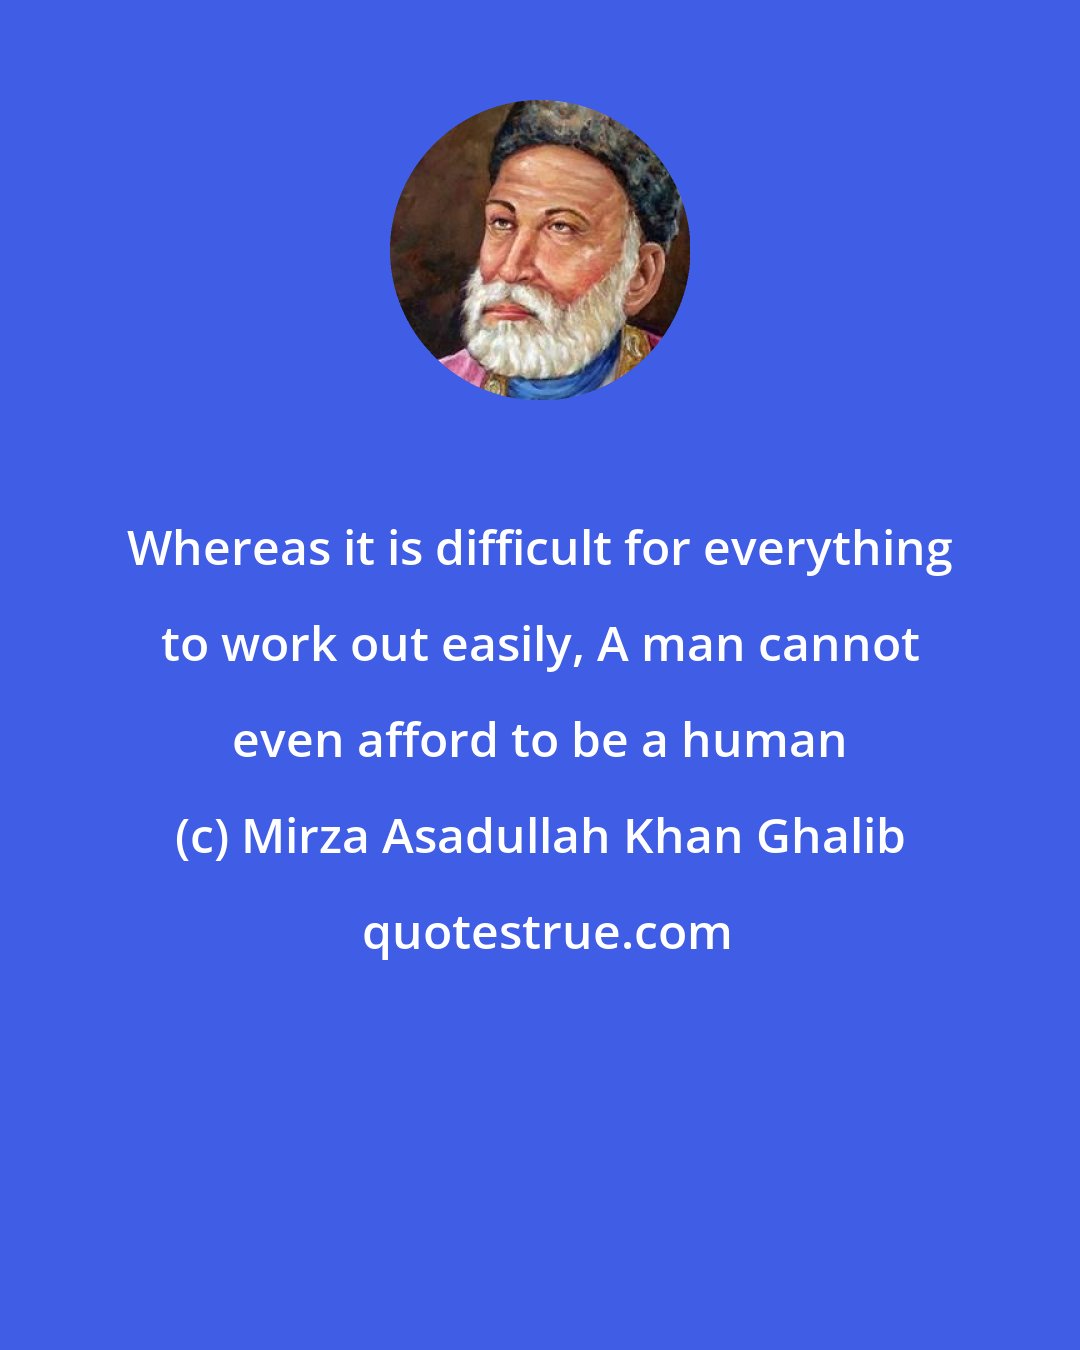 Mirza Asadullah Khan Ghalib: Whereas it is difficult for everything to work out easily, A man cannot even afford to be a human